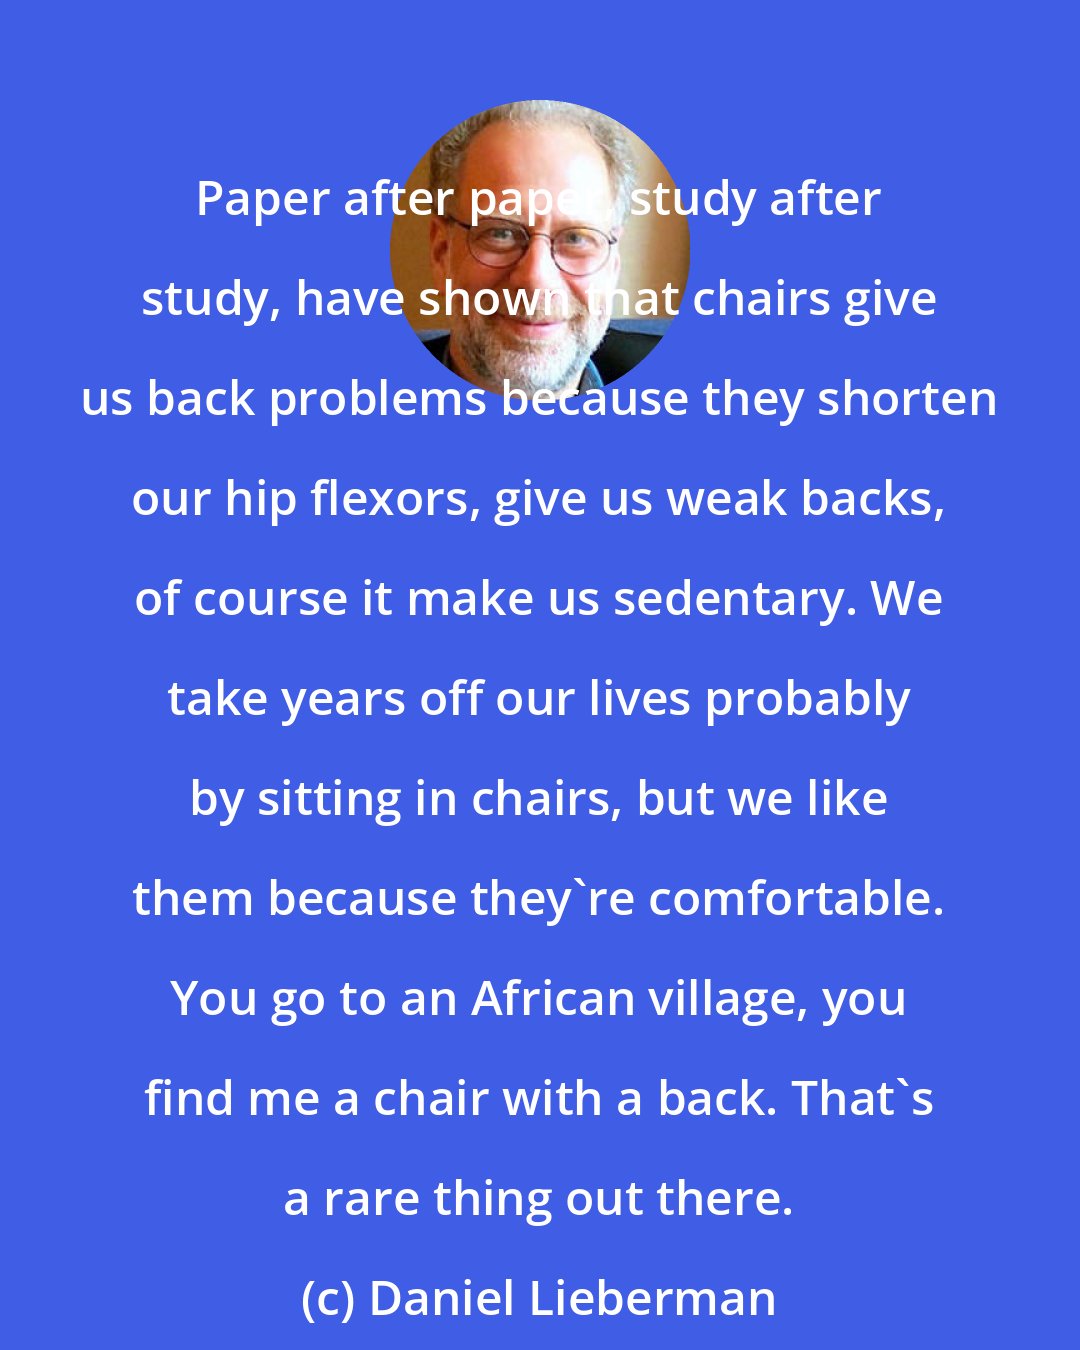 Daniel Lieberman: Paper after paper, study after study, have shown that chairs give us back problems because they shorten our hip flexors, give us weak backs, of course it make us sedentary. We take years off our lives probably by sitting in chairs, but we like them because they're comfortable. You go to an African village, you find me a chair with a back. That's a rare thing out there.